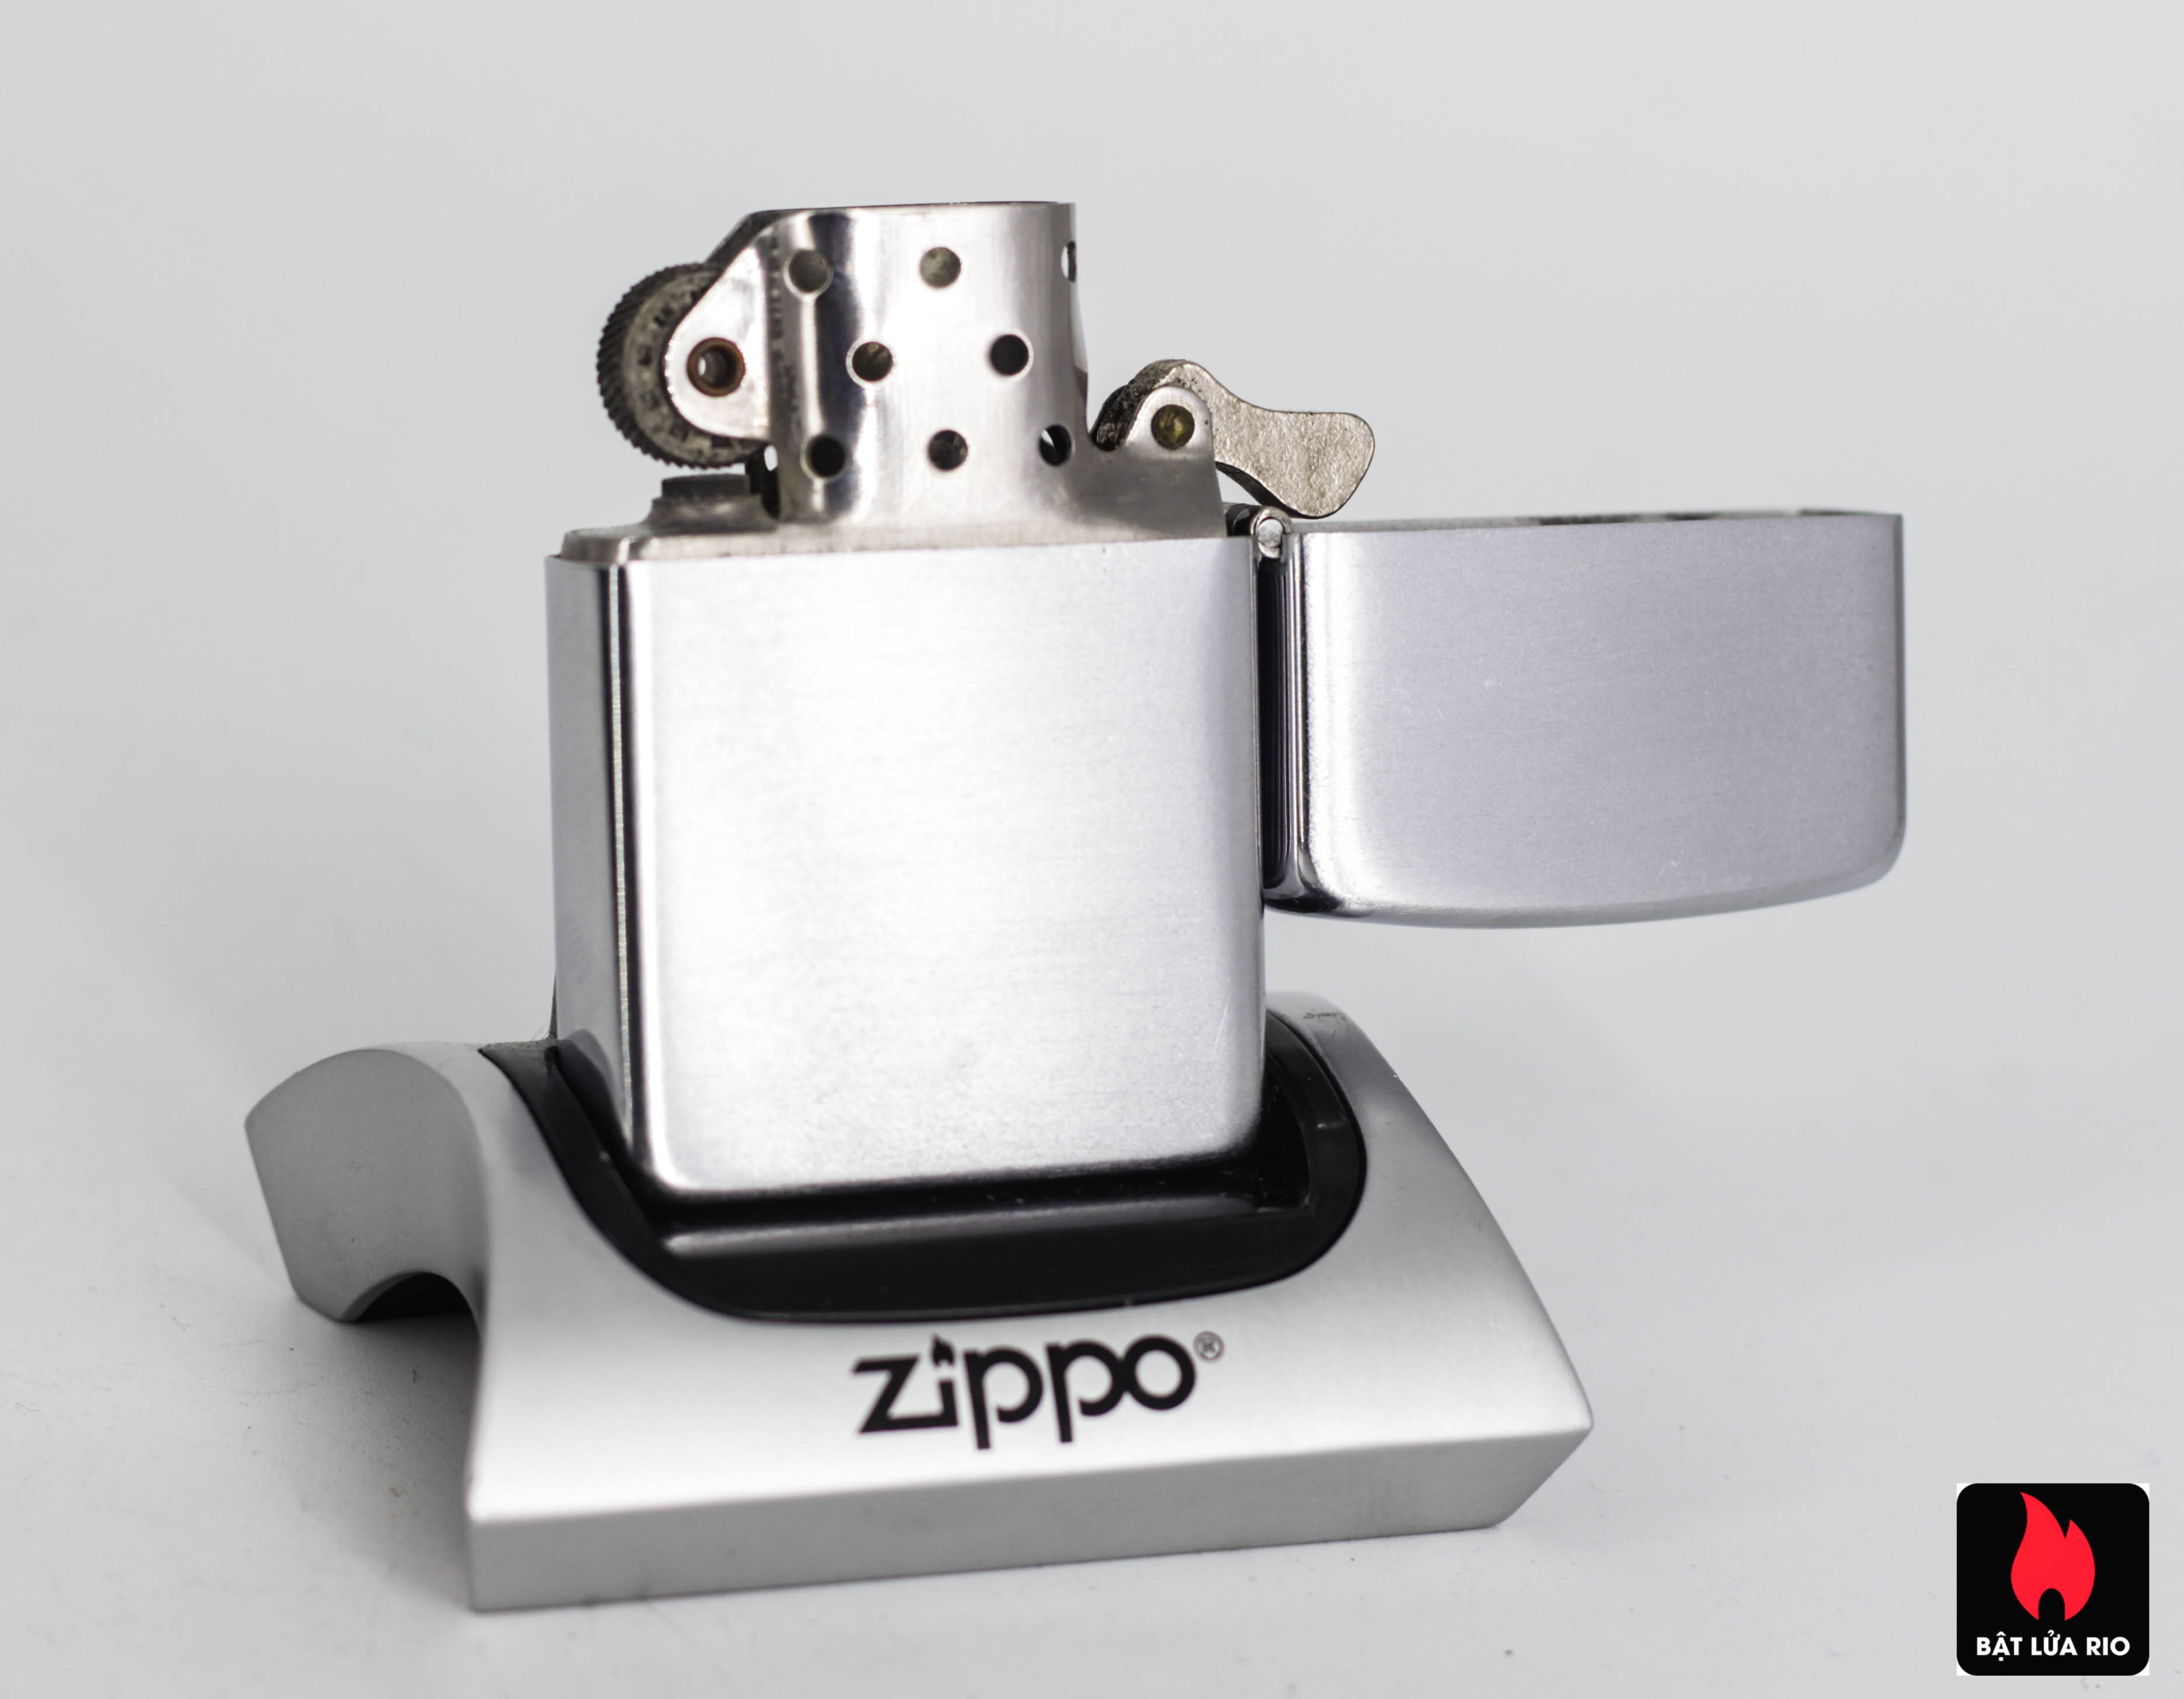 ZIPPO XƯA 1954 - 1955 - AIREX SPINNING TACKLE